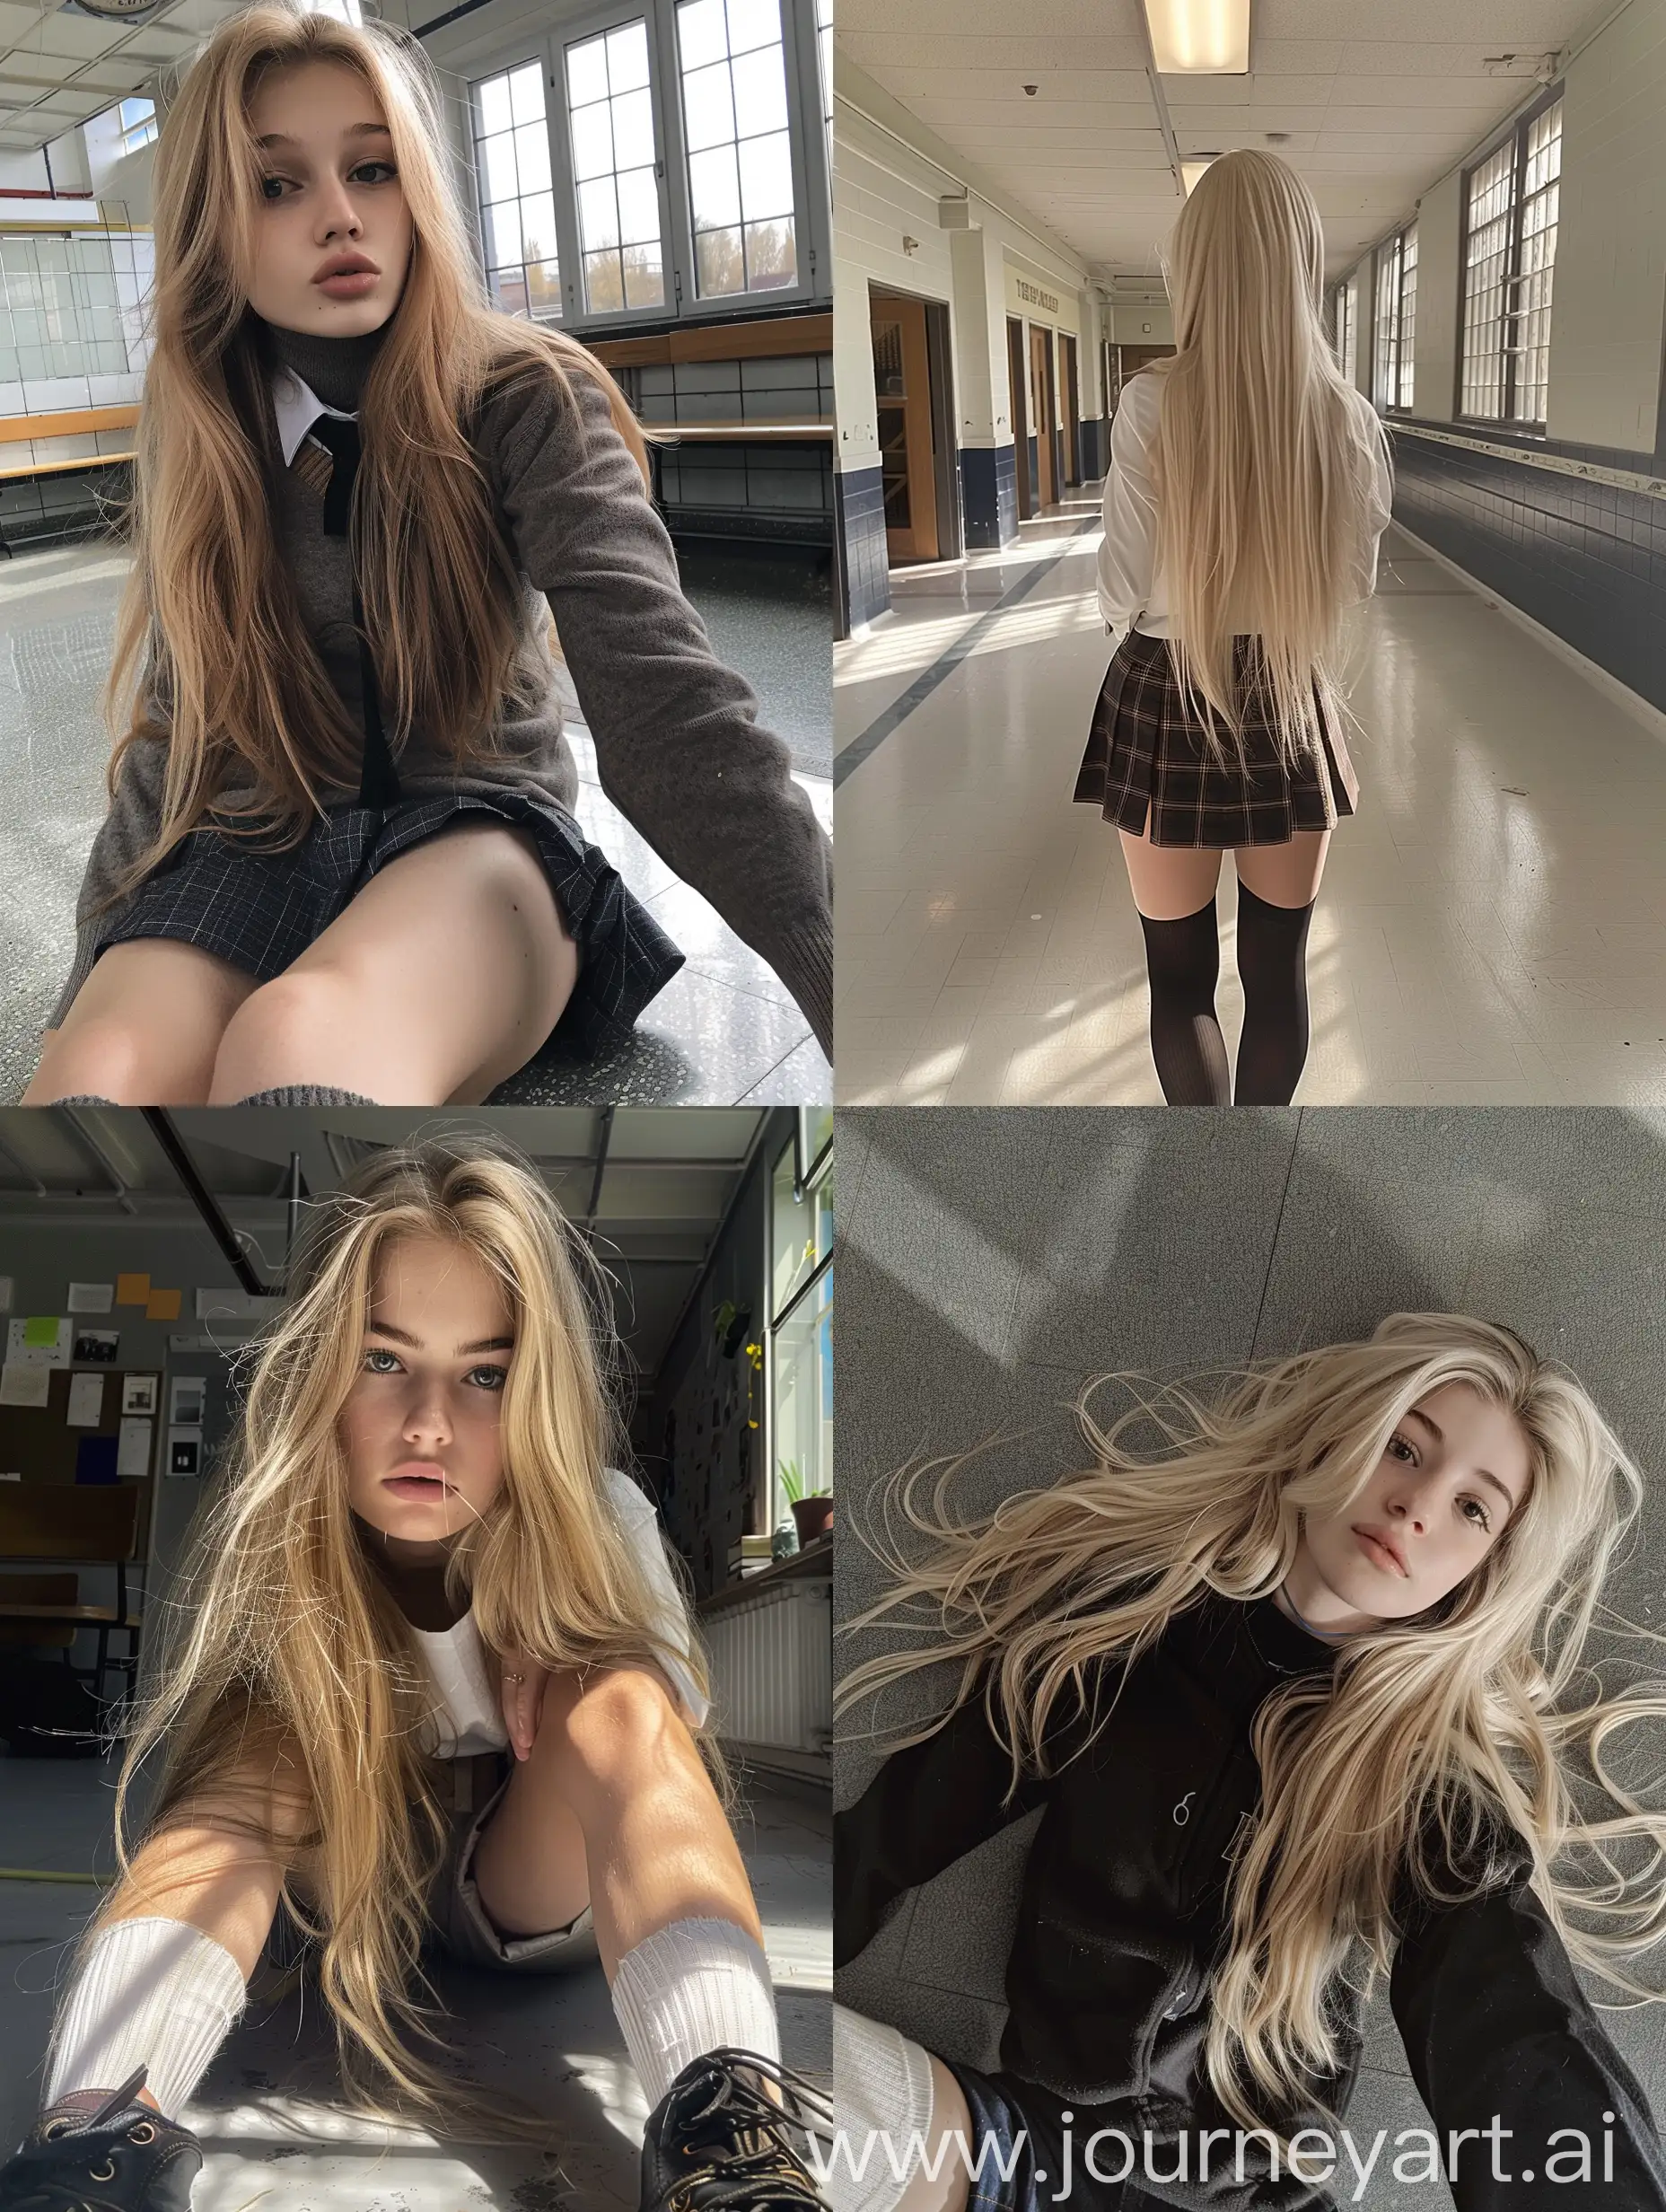 1 girl, long blond hair , 22 years old, influencer, beauty , back, down view,  in the school ,  school  uniform , makeup, floor view,  , socks and boots, no effect, selfie , iphone selfie, no filters , iphone photo natural